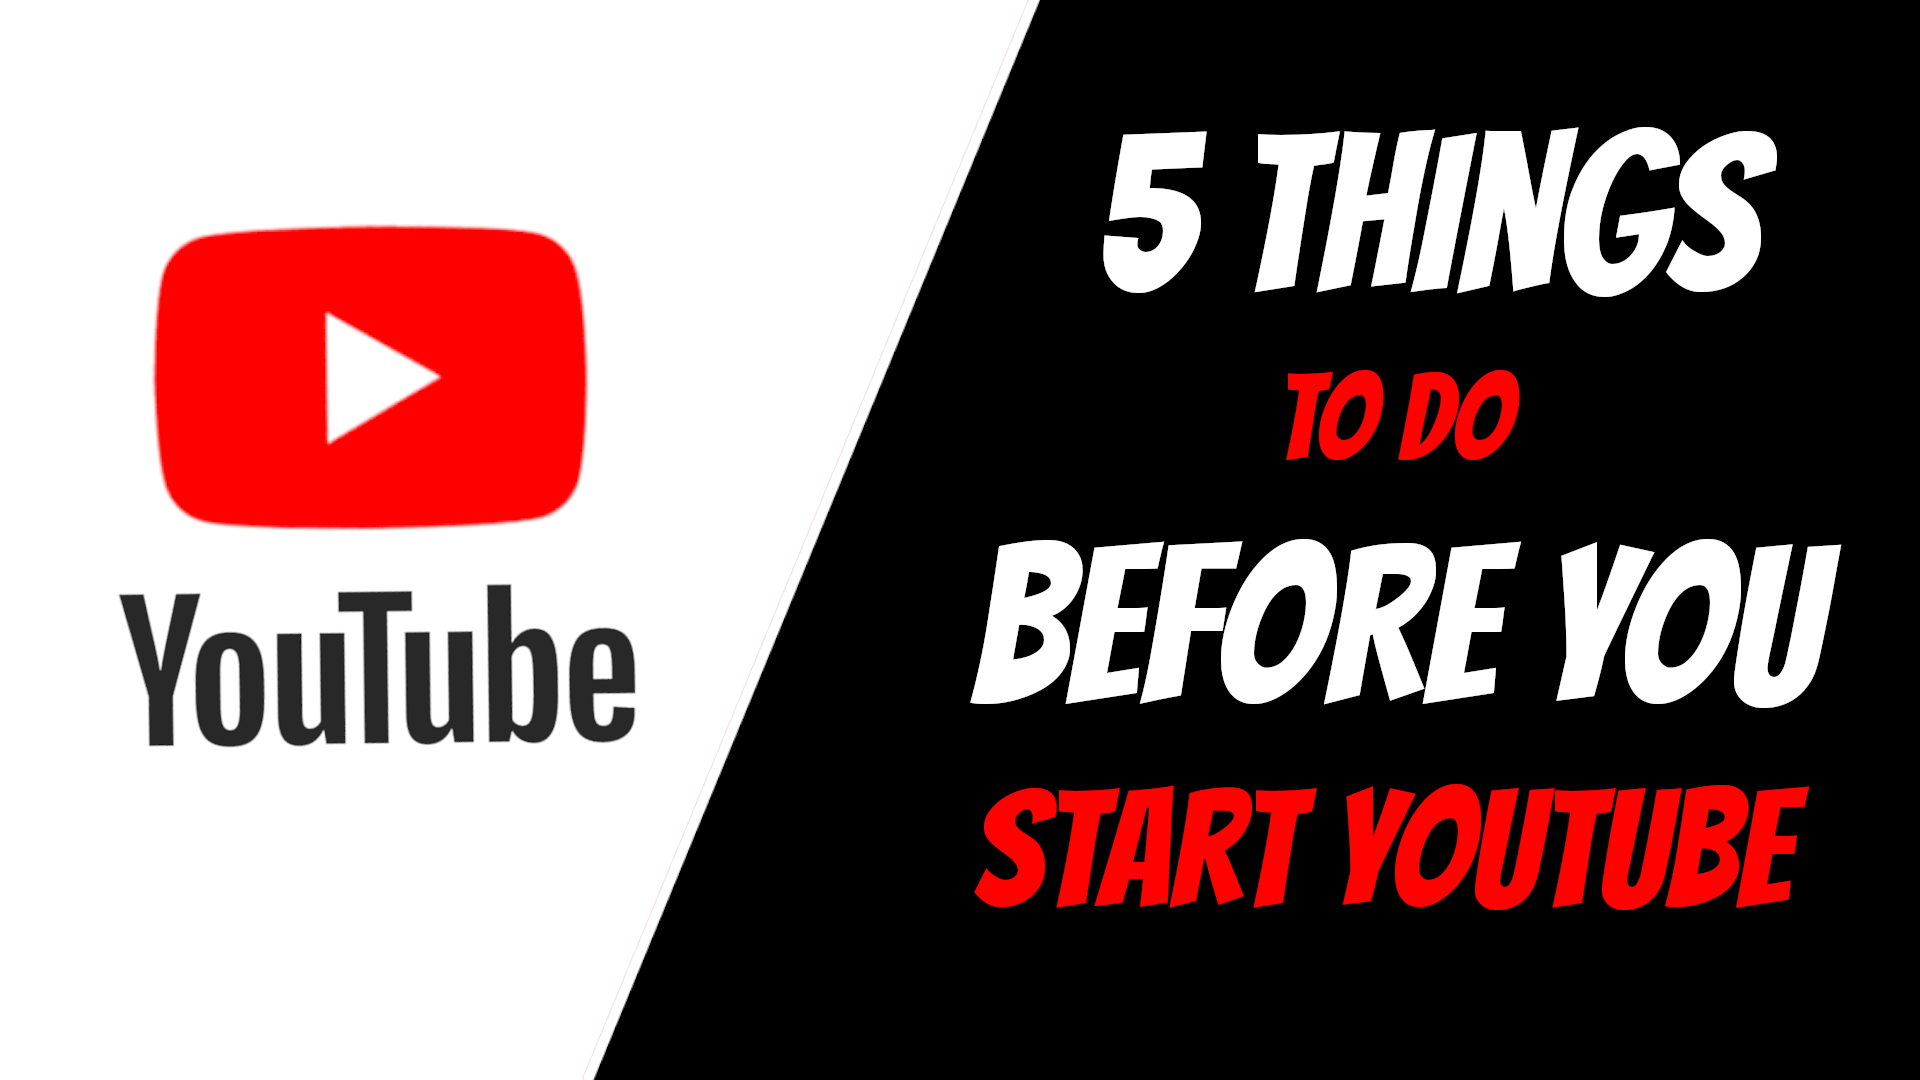 6 Things TO DO for new YouTube Channels - before start uploading videos